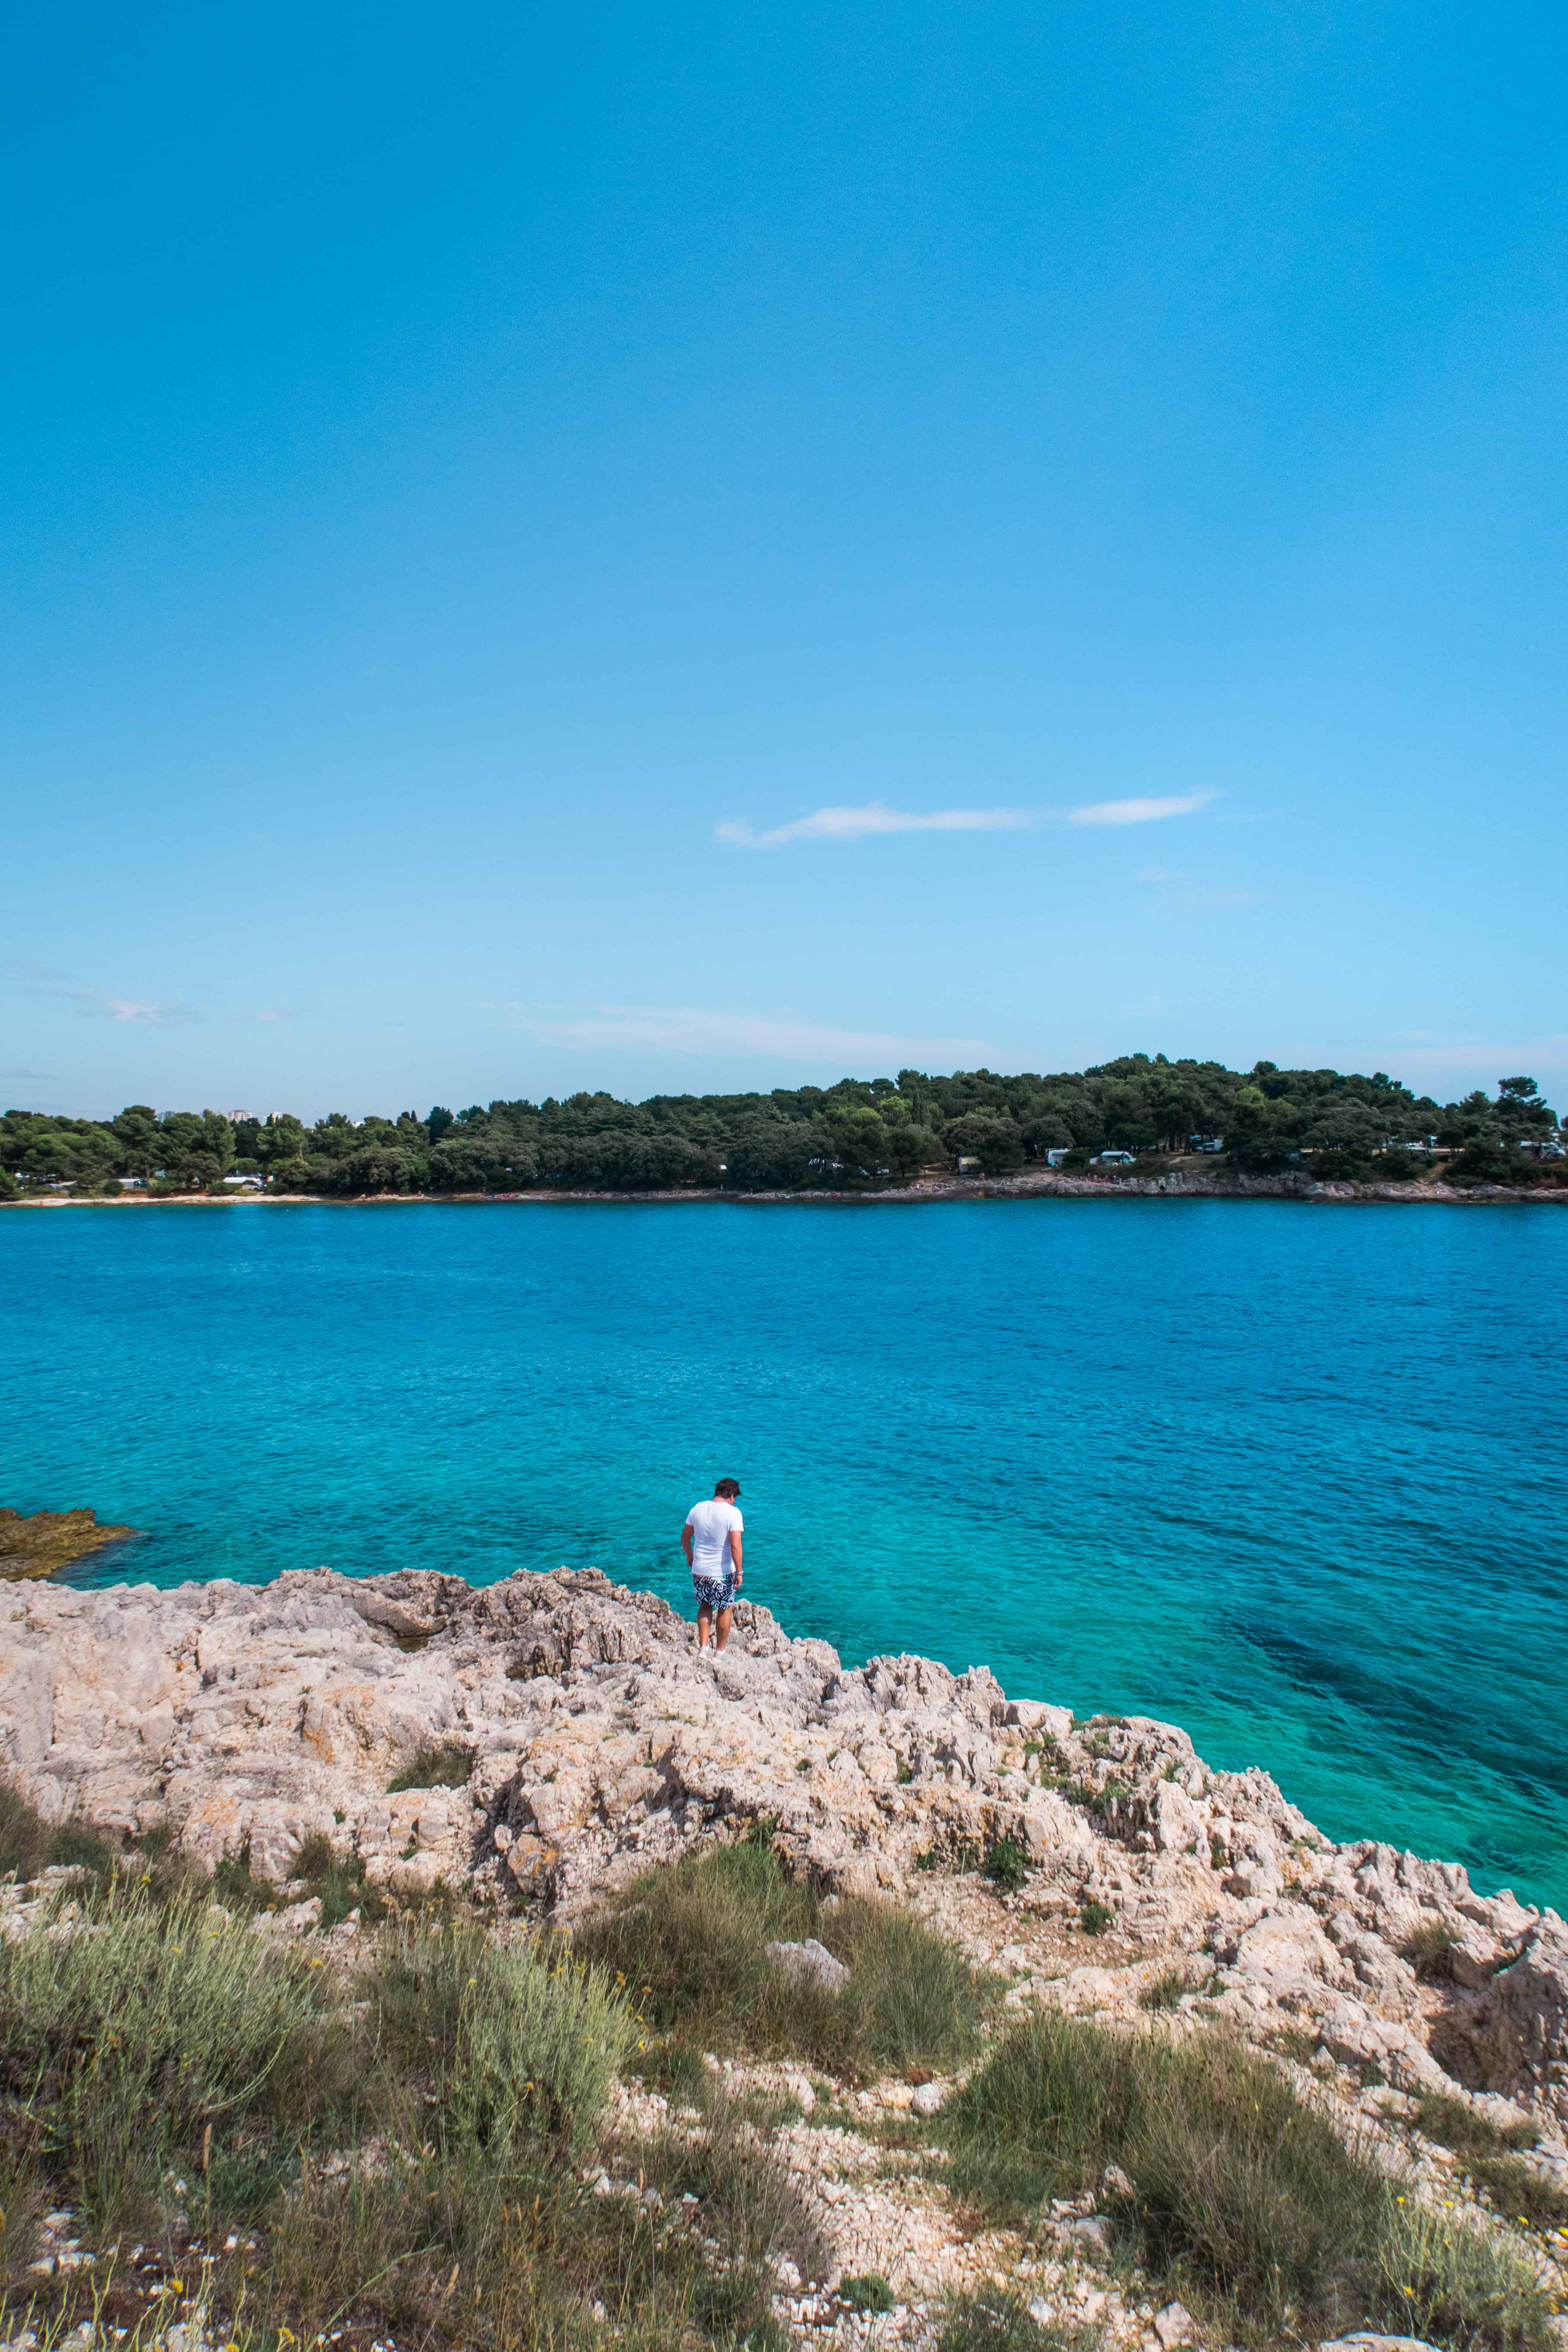 How to Spend 2 Days in Istria, Croatia | Cliff Jumping Beach in Pula | The Republic of Rose | 48 Hours Exploring Pula and Rovinj | #Pula #Rovinj #Istria #Croatia